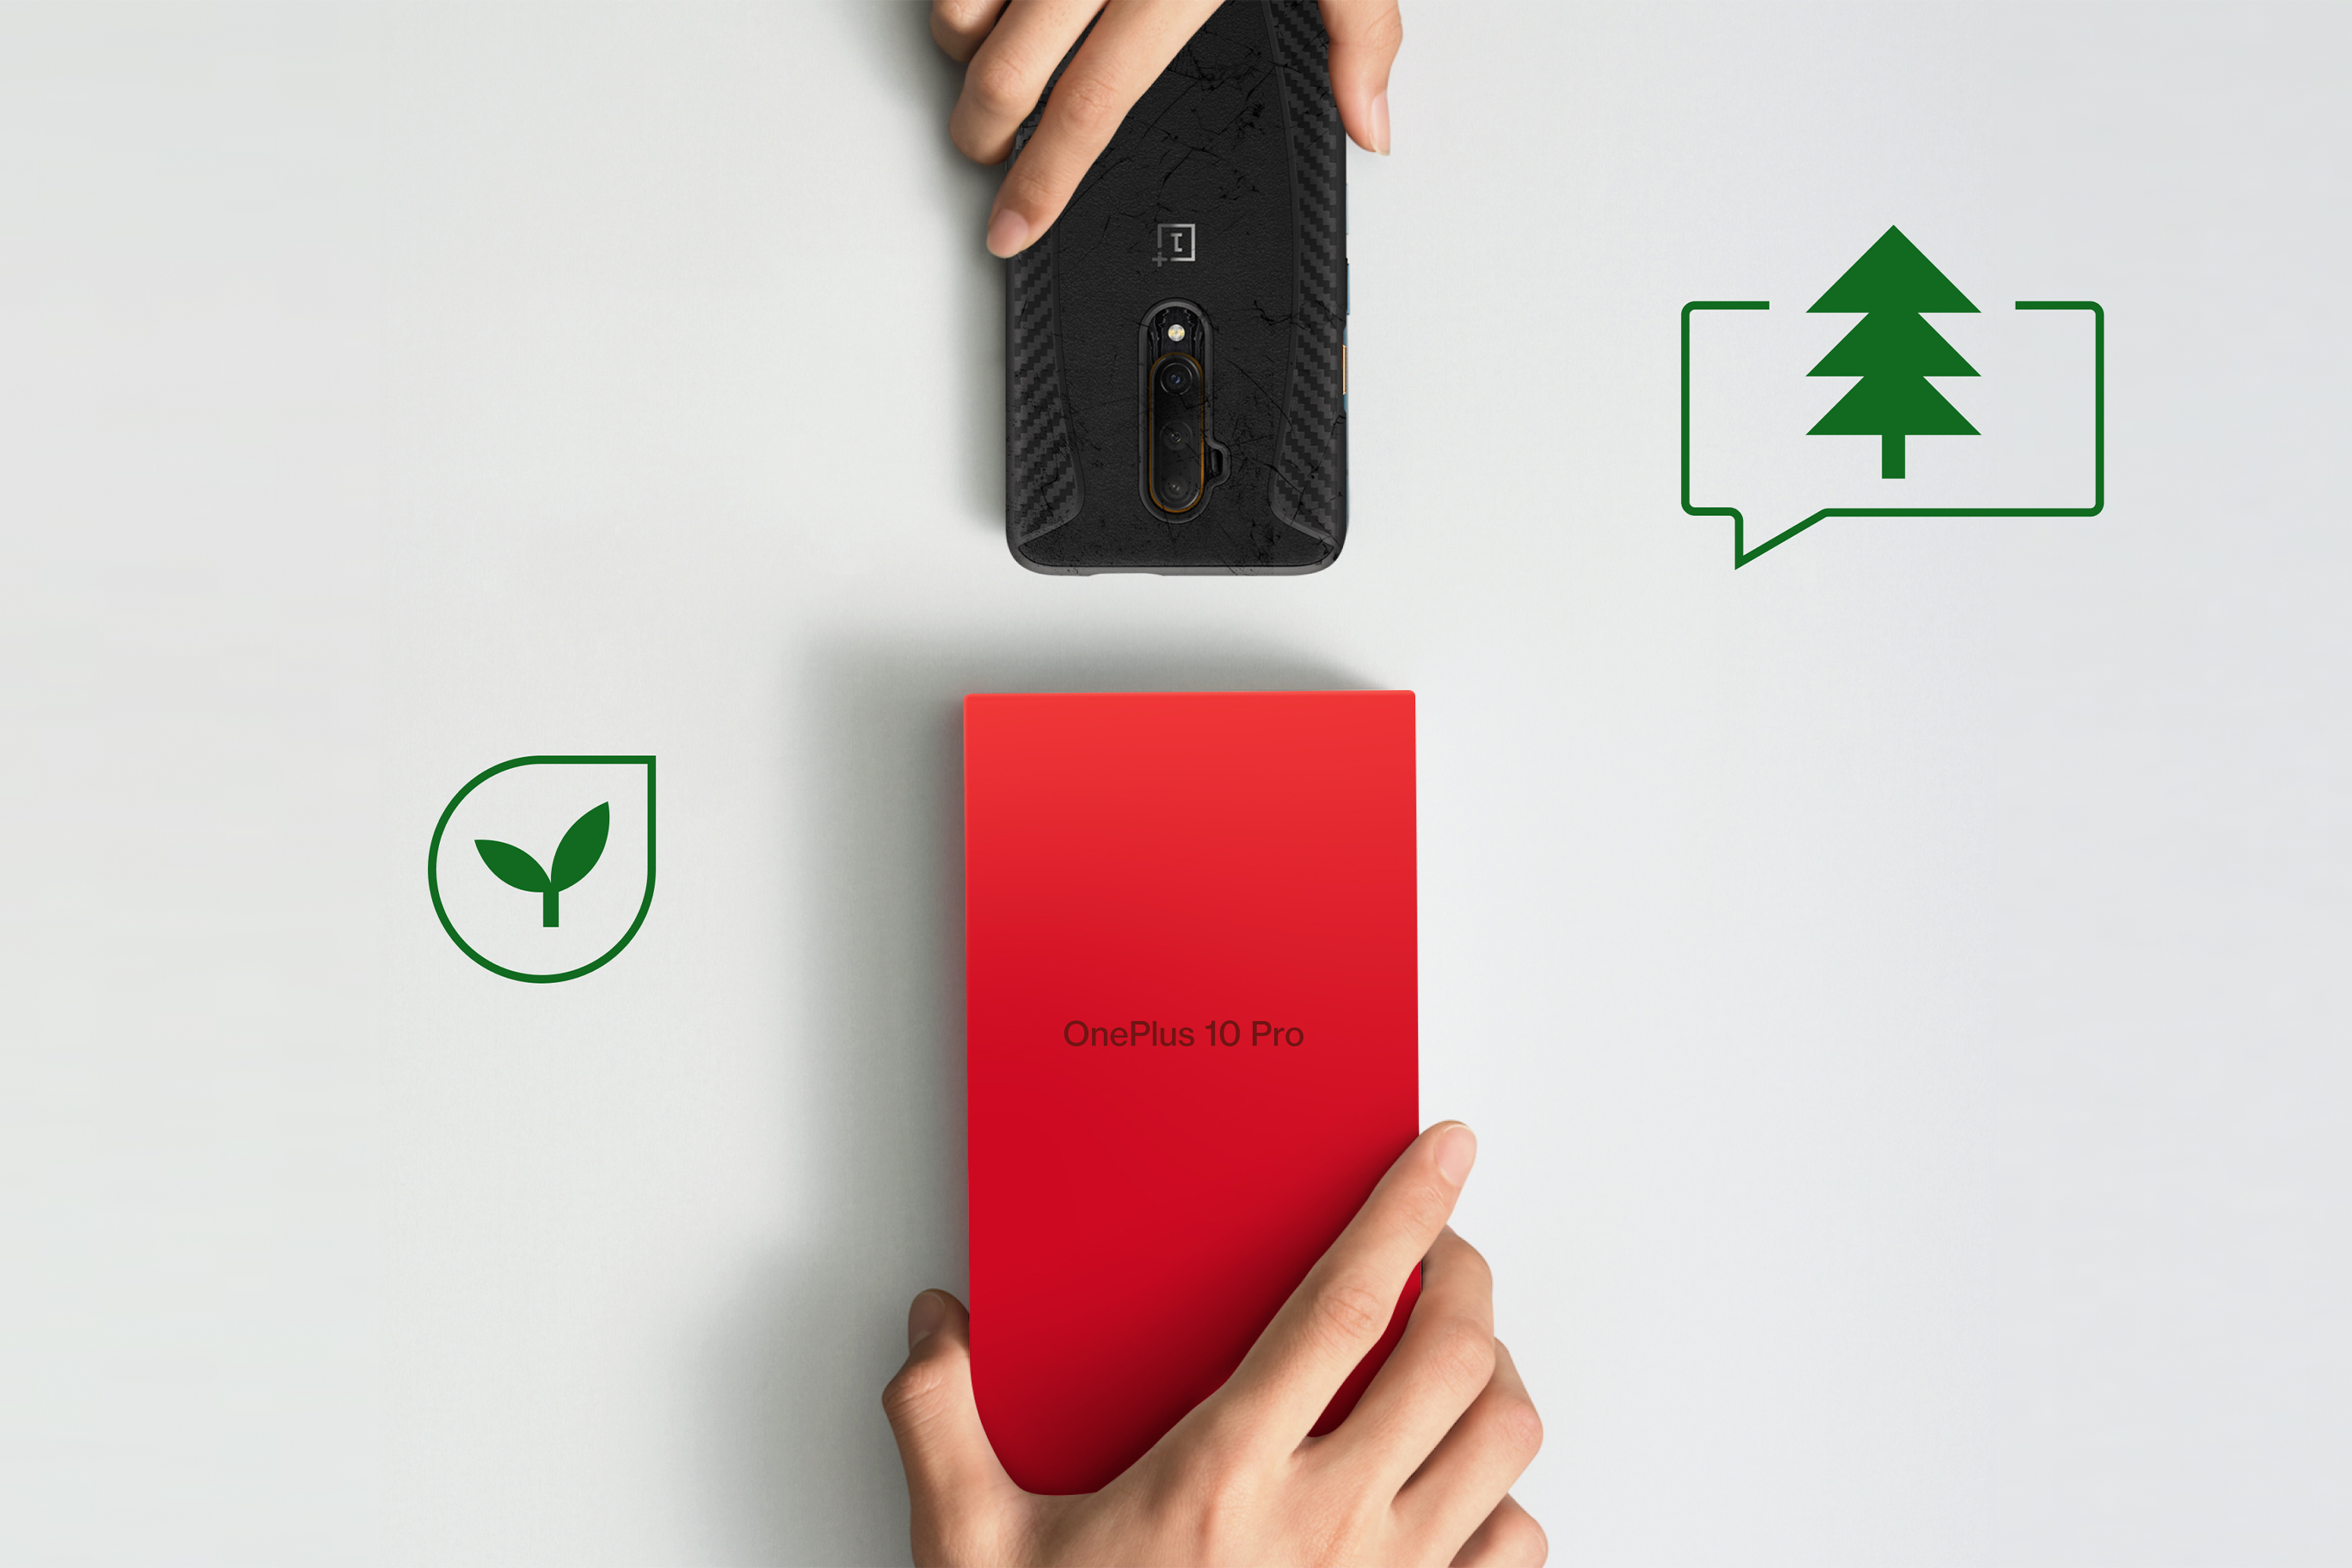 OnePlus wants your help to plant thousands of new trees | Digital Trends